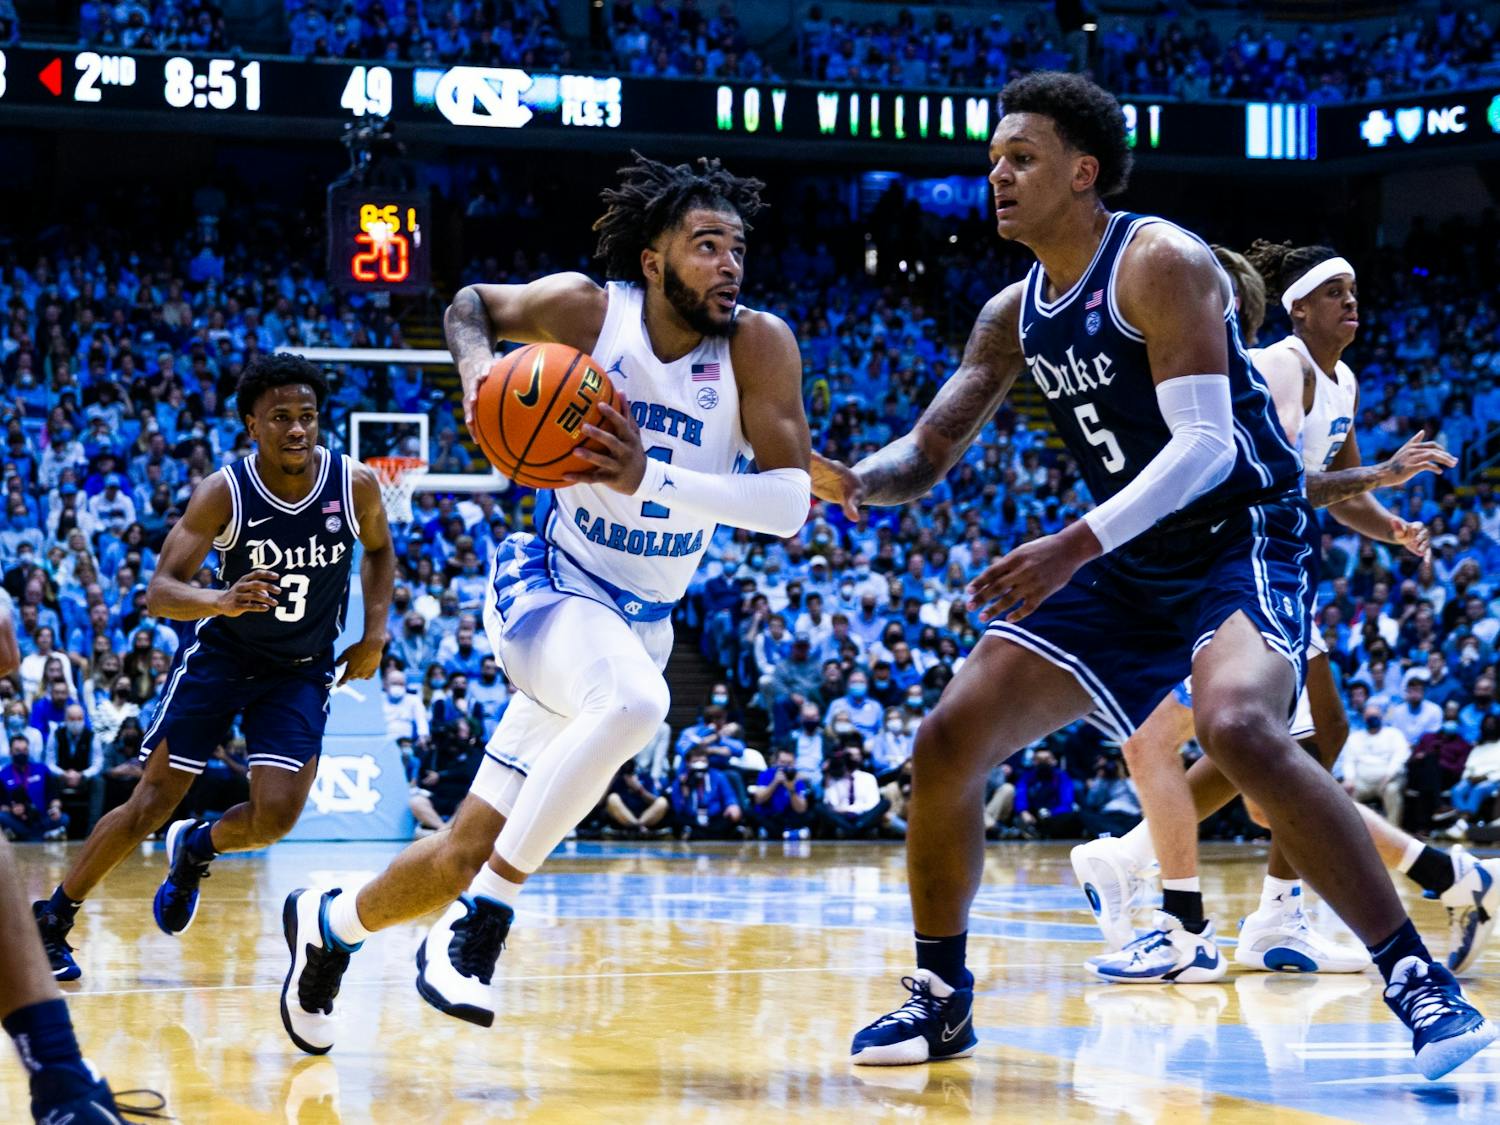 Sophomore guard RJ Davis (4) drives to the basket in the Dean Smith Center during the UNC men’s basketball game on Saturday, Feb. 5, 2022. Duke won 87-67.